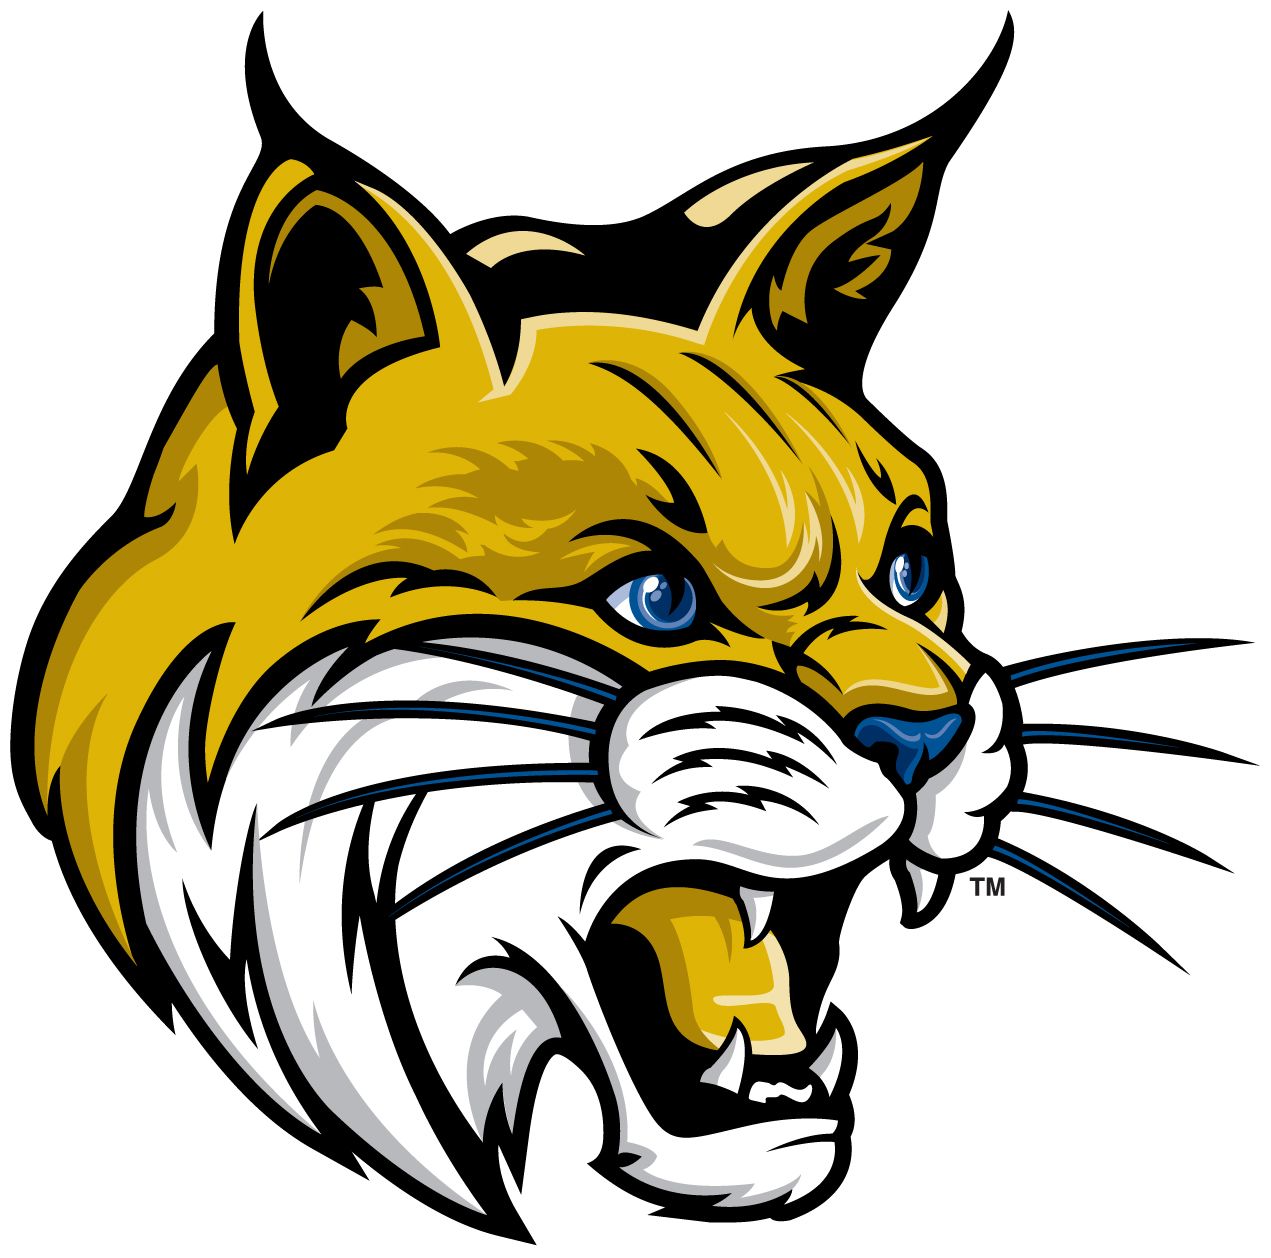 Bobcat clipart side view. Uc merced campus graphics